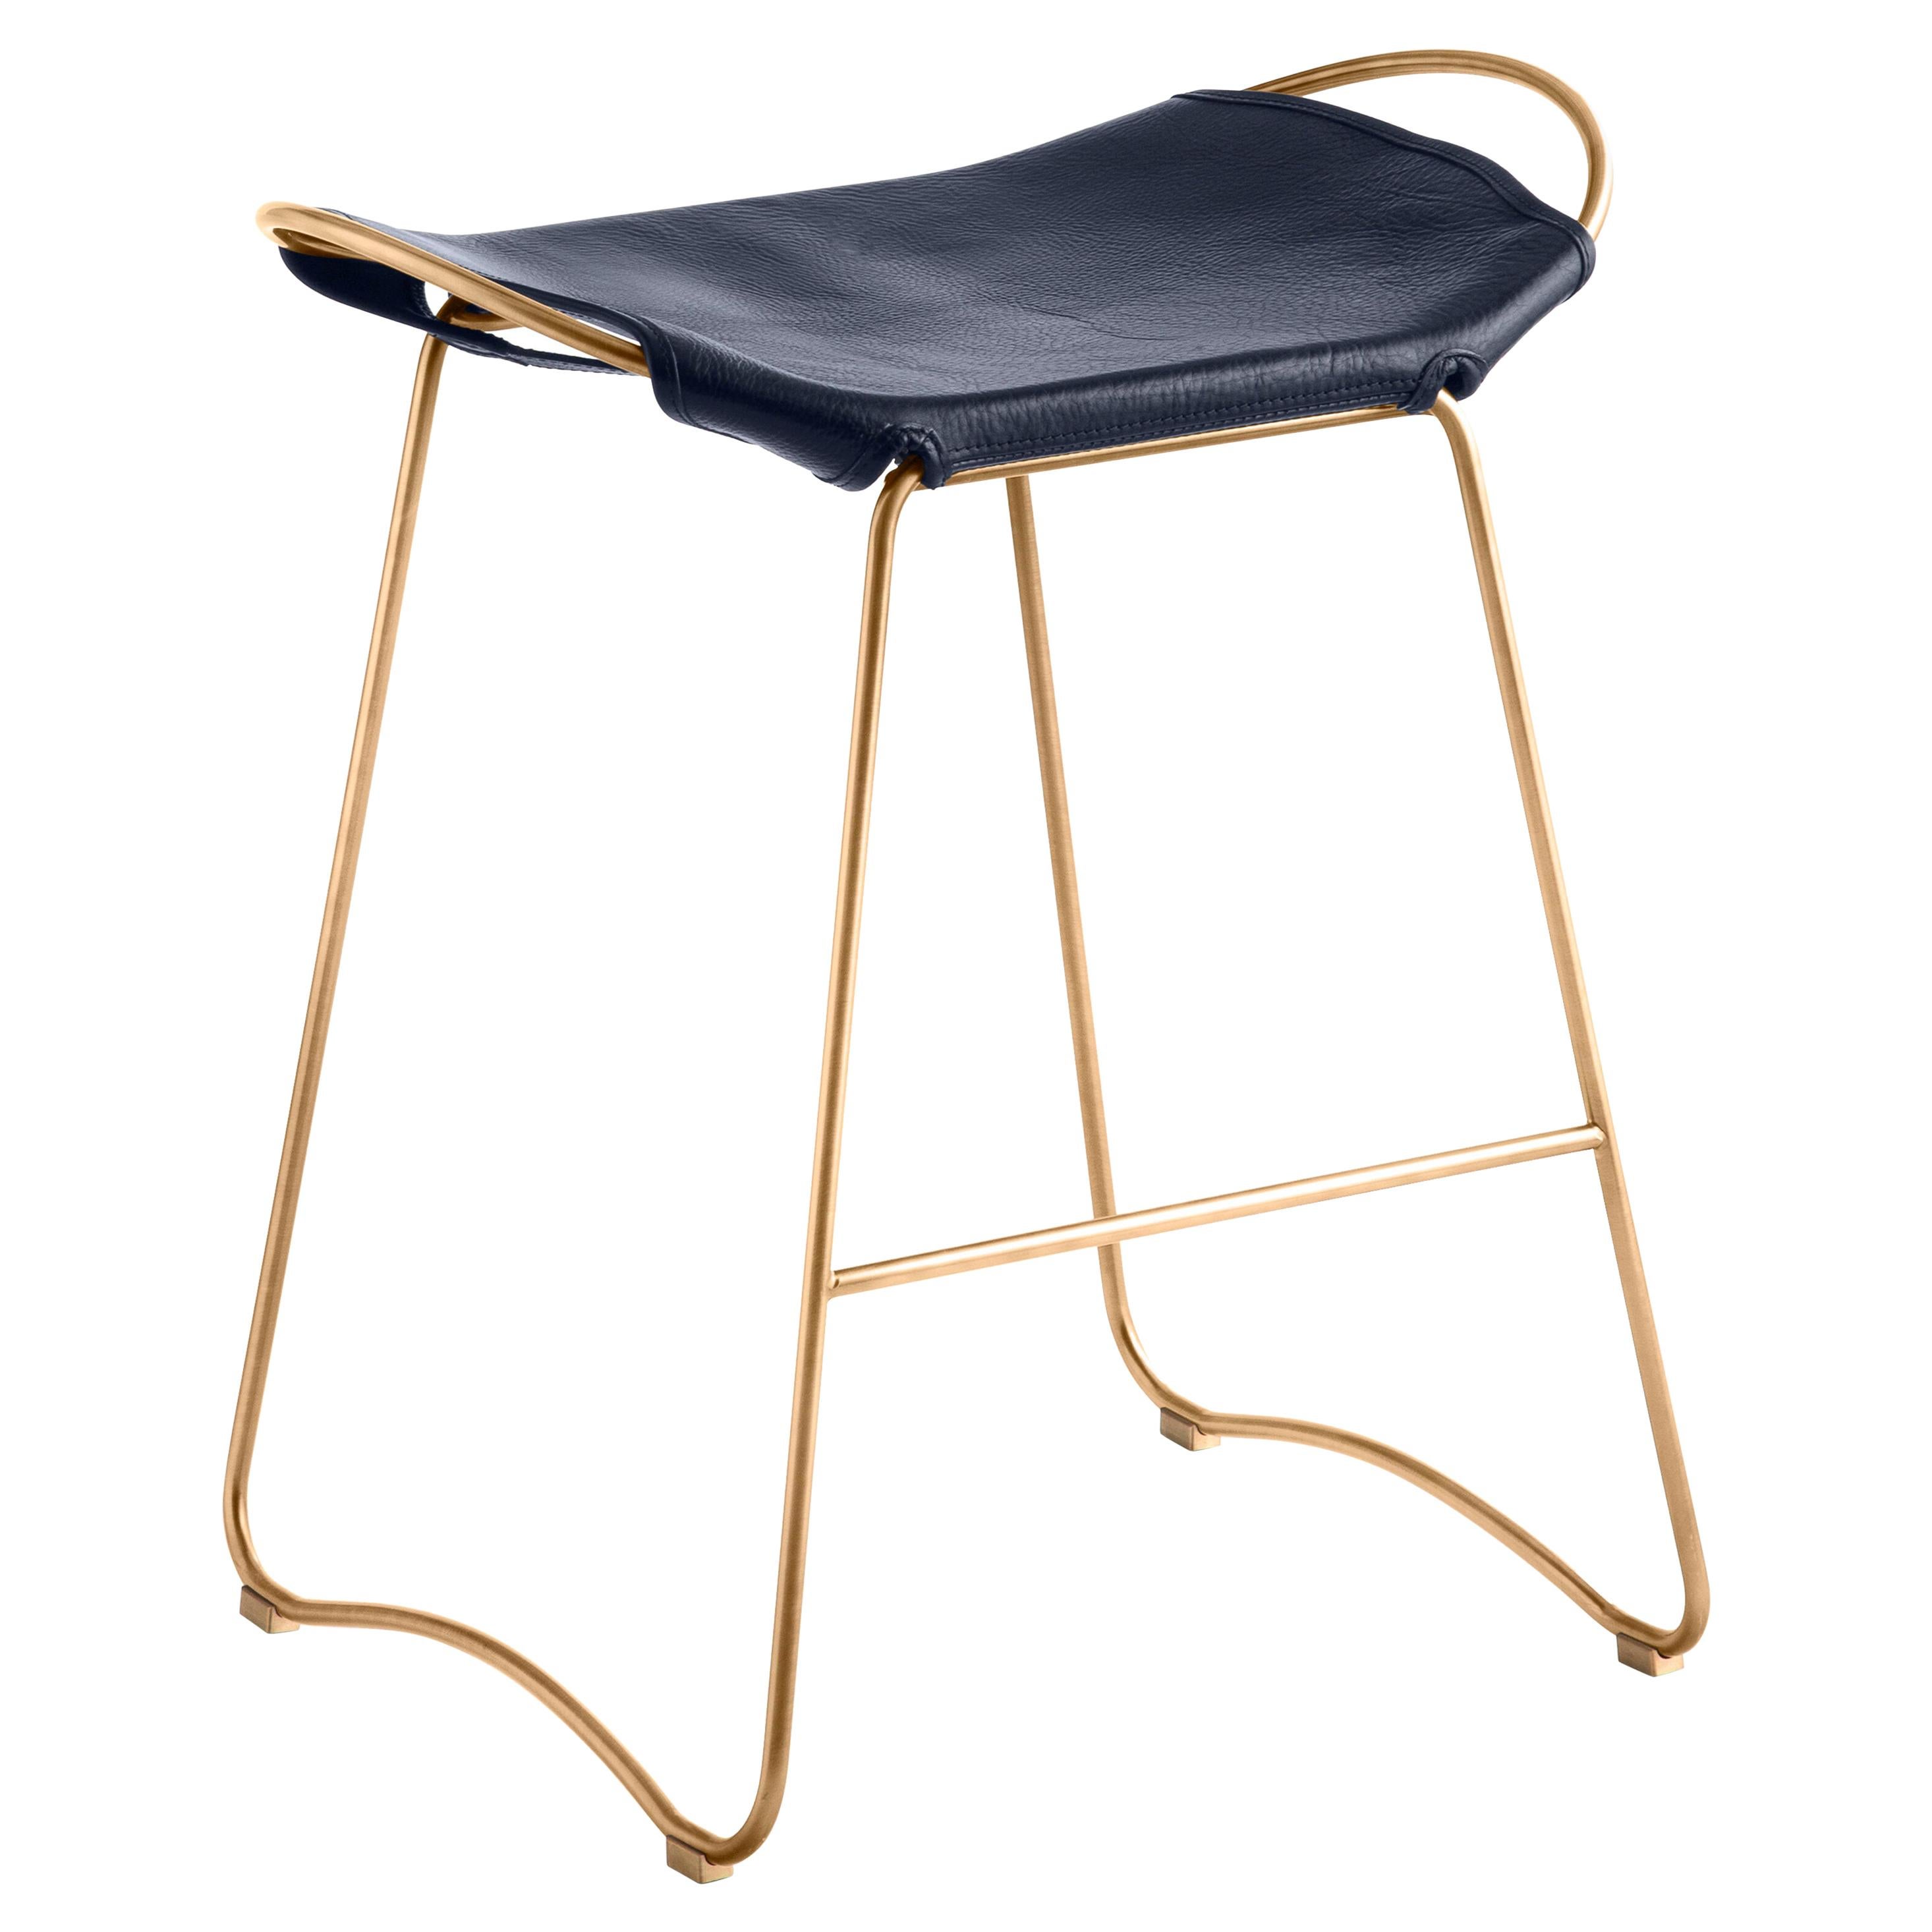 The Hug contemporary counter stool is designed and conceived with a light aesthetic, the slight oscillation of the steel rod of 12 mm is complemented by the flexibility of the double 3.5 mm thick leather. When sitting in this furniture you feel an